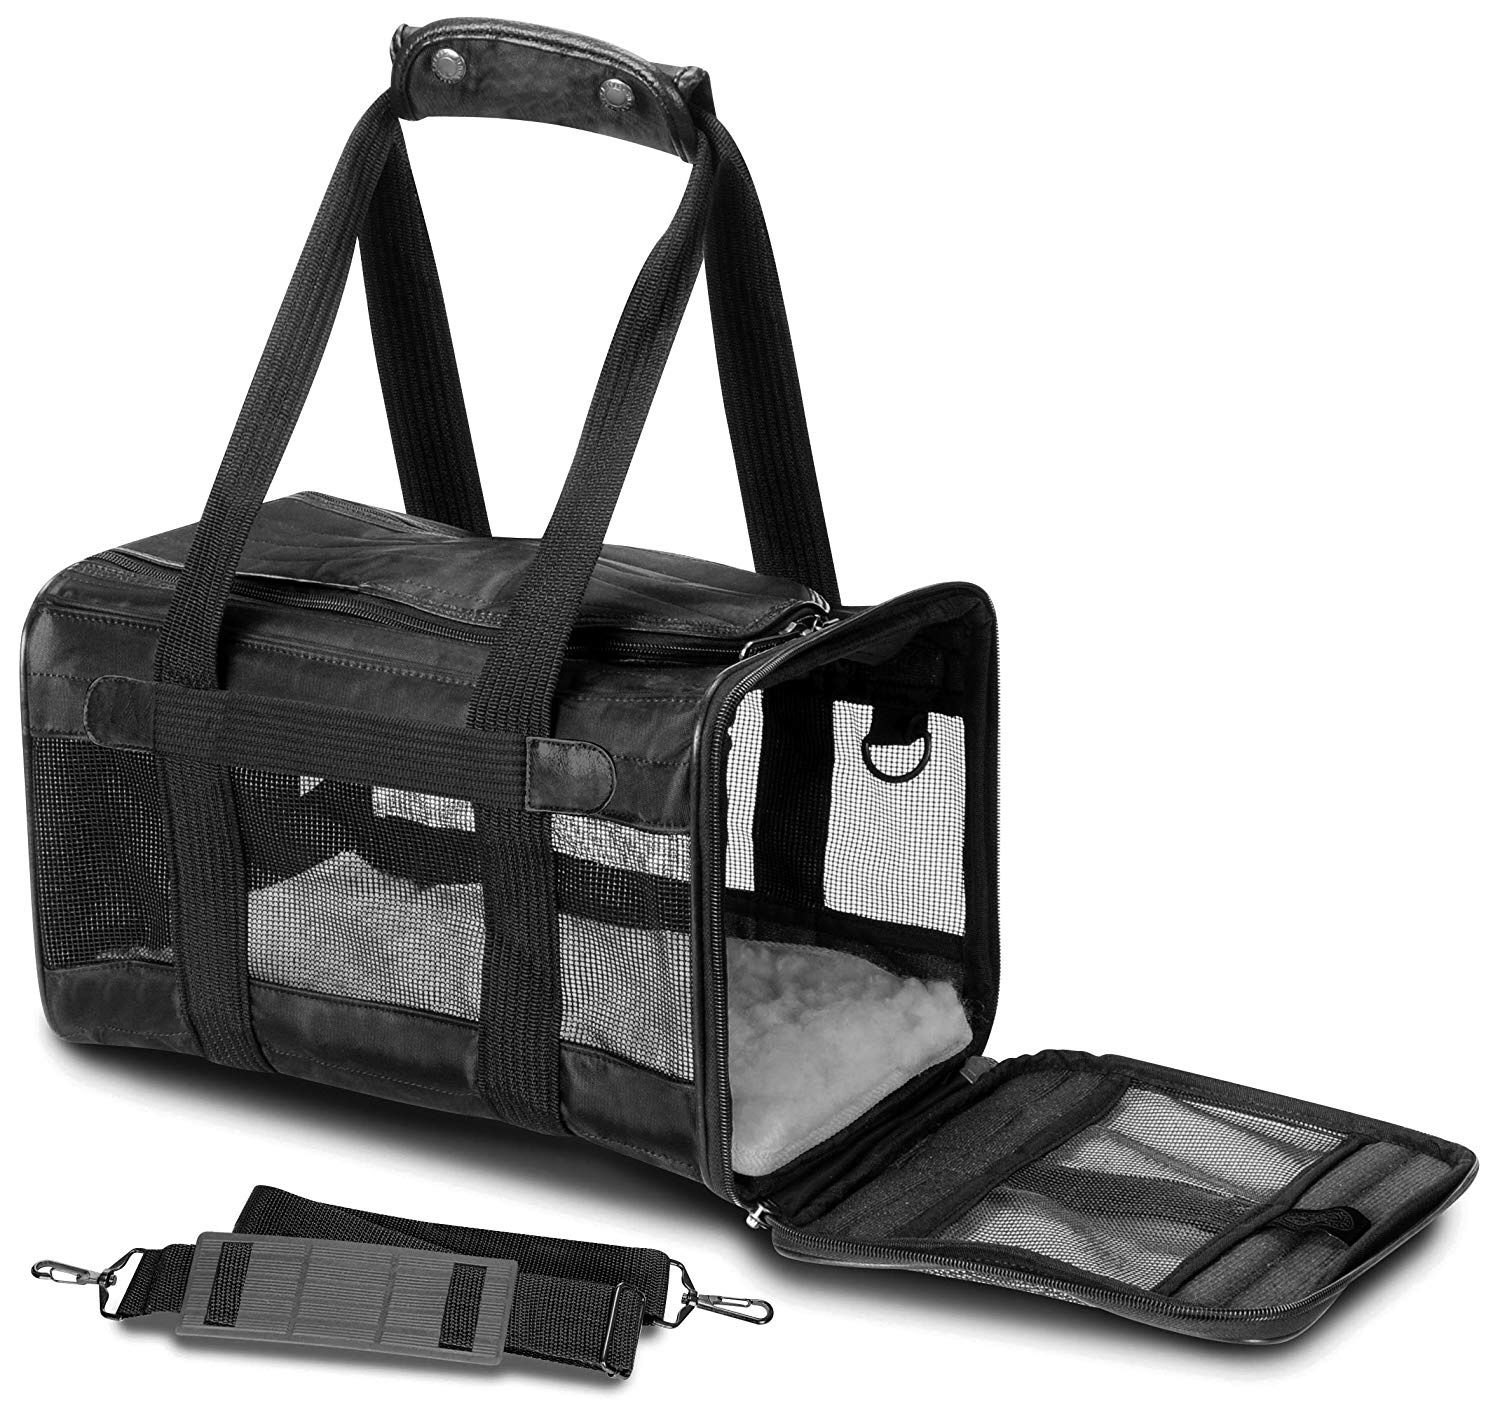 Sherpa Travel Original Deluxe Airline Approved Pet Carrier Black Small Kennel Cats Dogs FREE SHIPPING